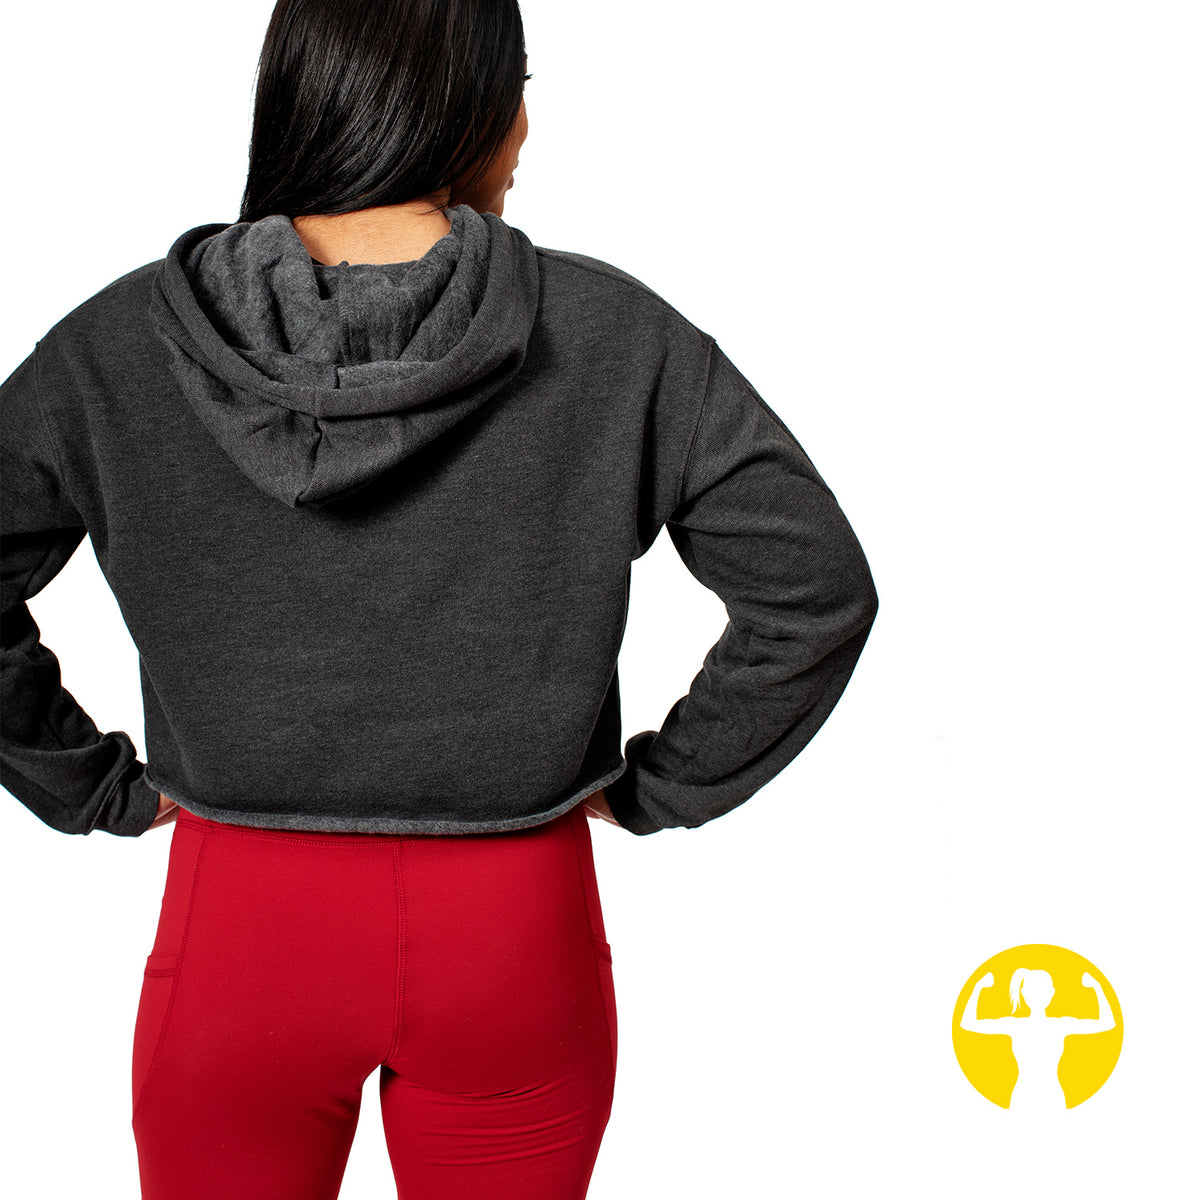 Cropped Hoodies & Tank Tops with Sayings | Asskicker Activewear